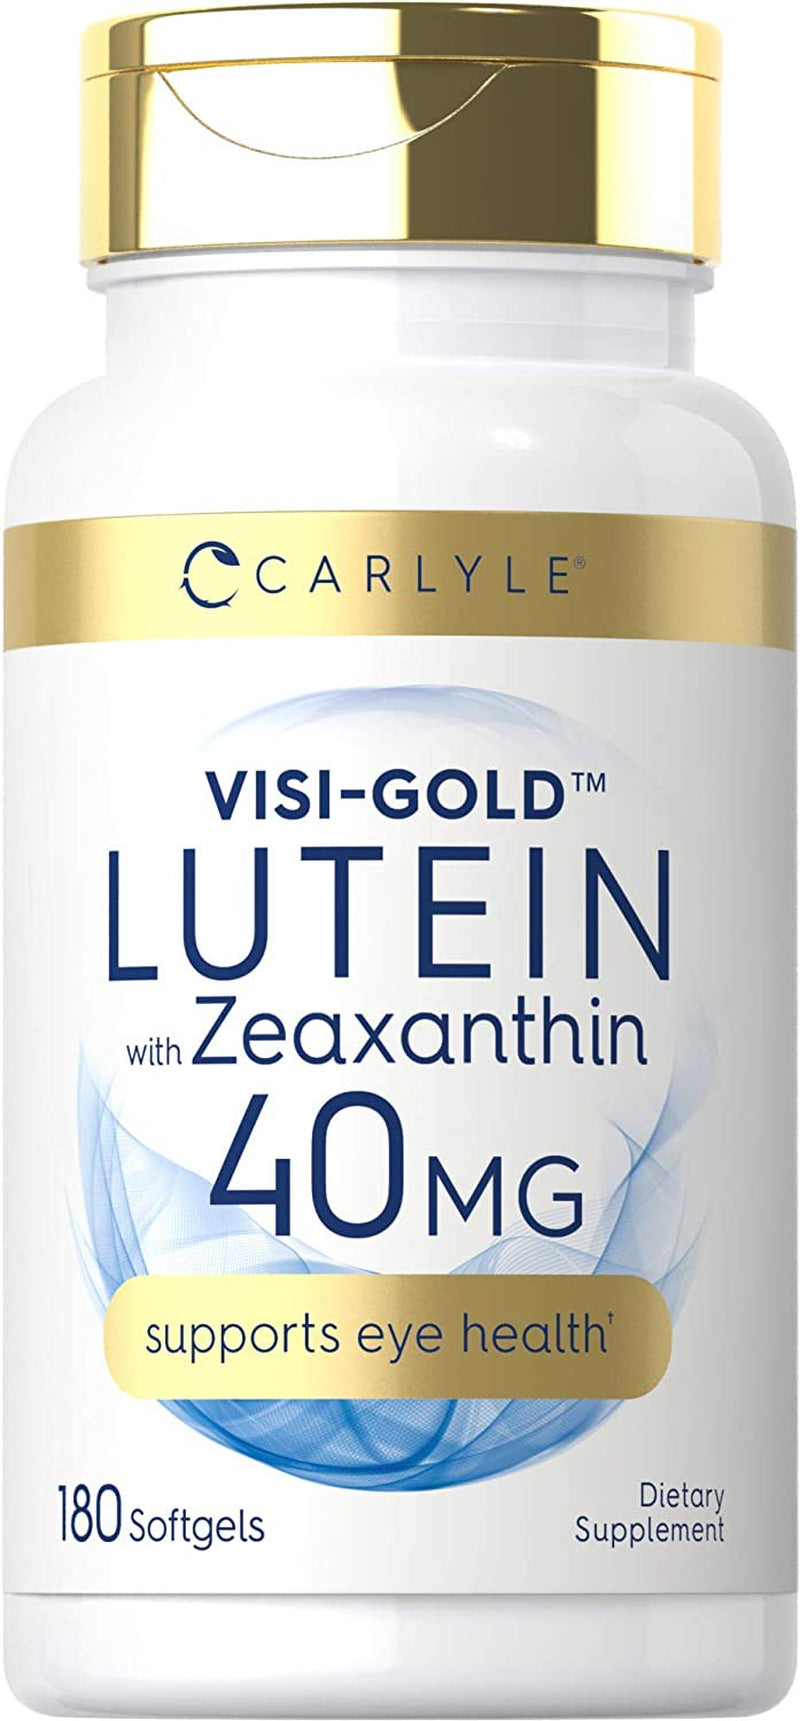 Lutein 40Mg and Zeaxanthin | 180 Softgels | by Carlyle